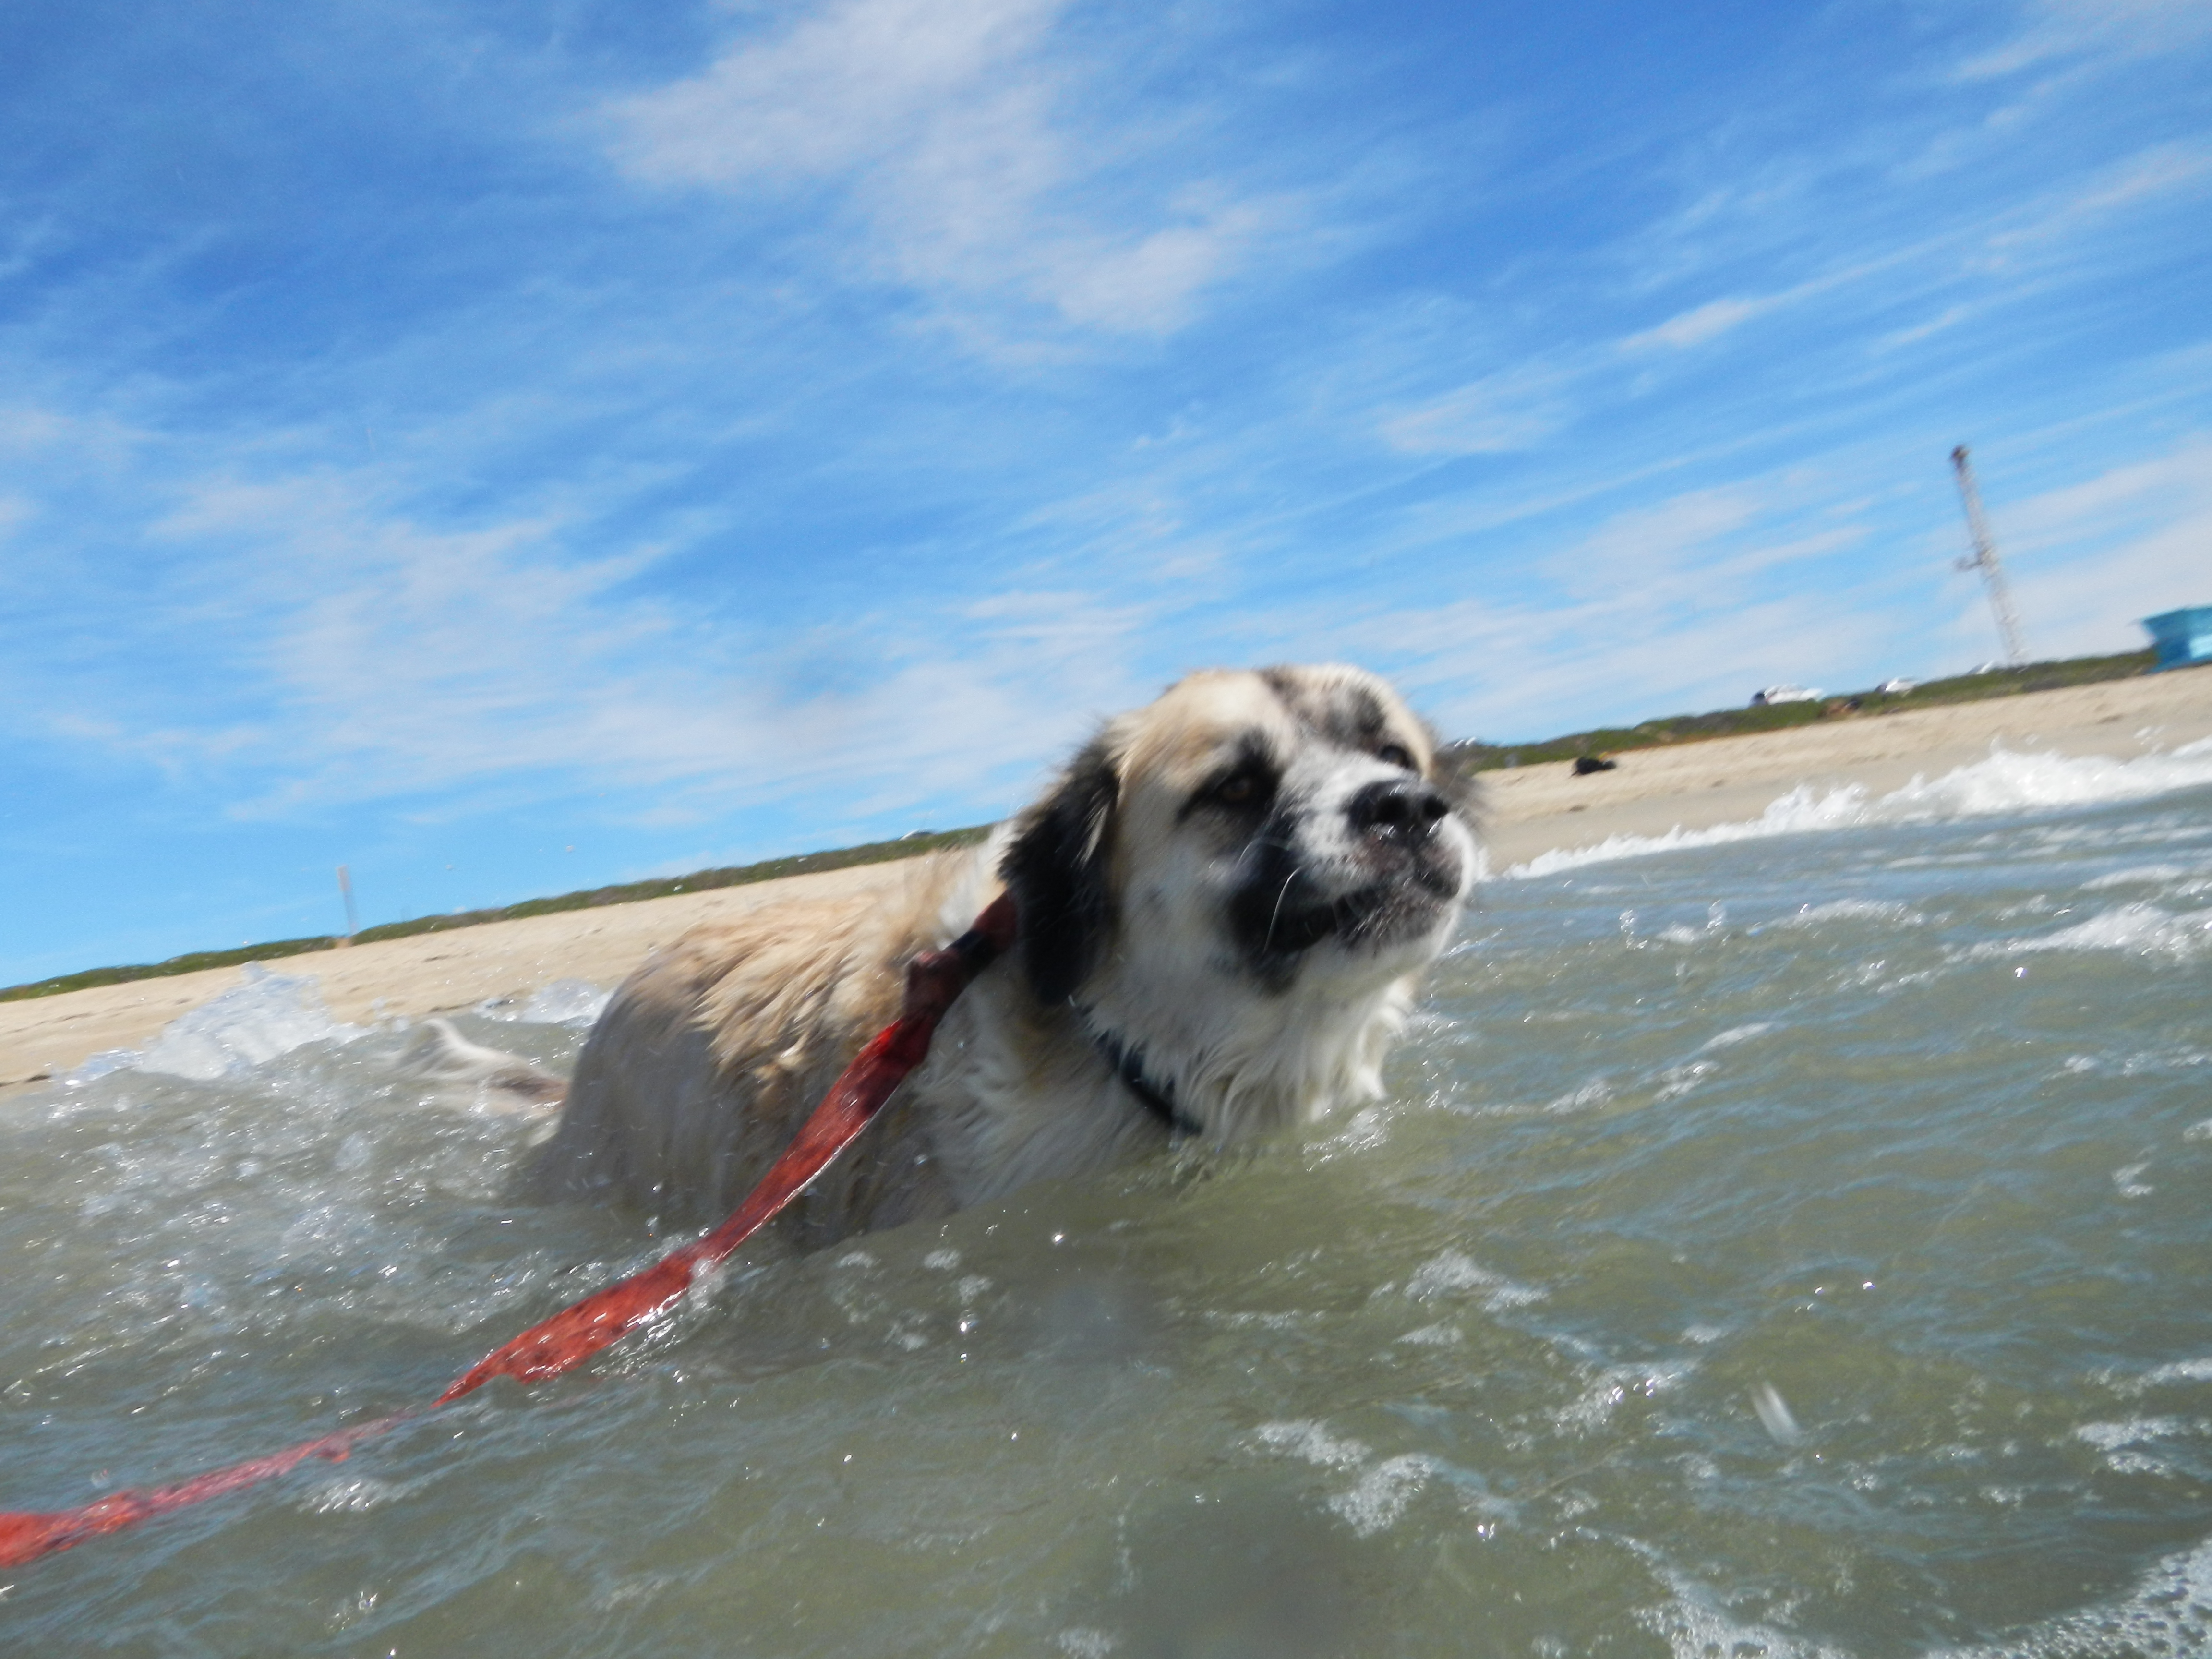 Herman cooling off in the Pacific Ocean